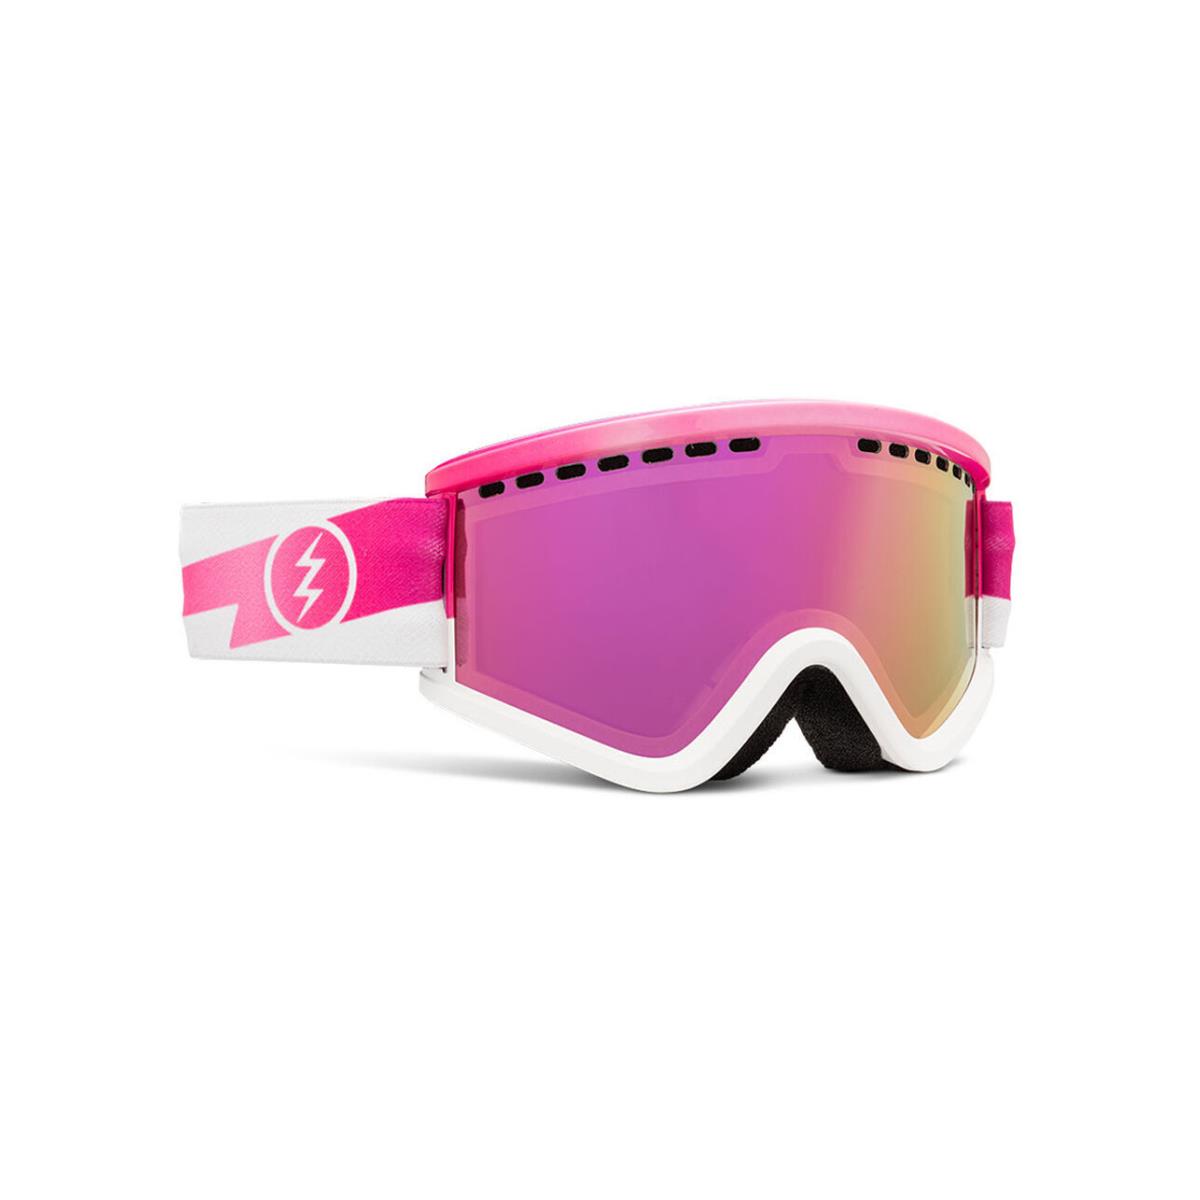 Electric Visual Egv.k Pink Volt Youth Snowboarding Goggles Pink Chrome